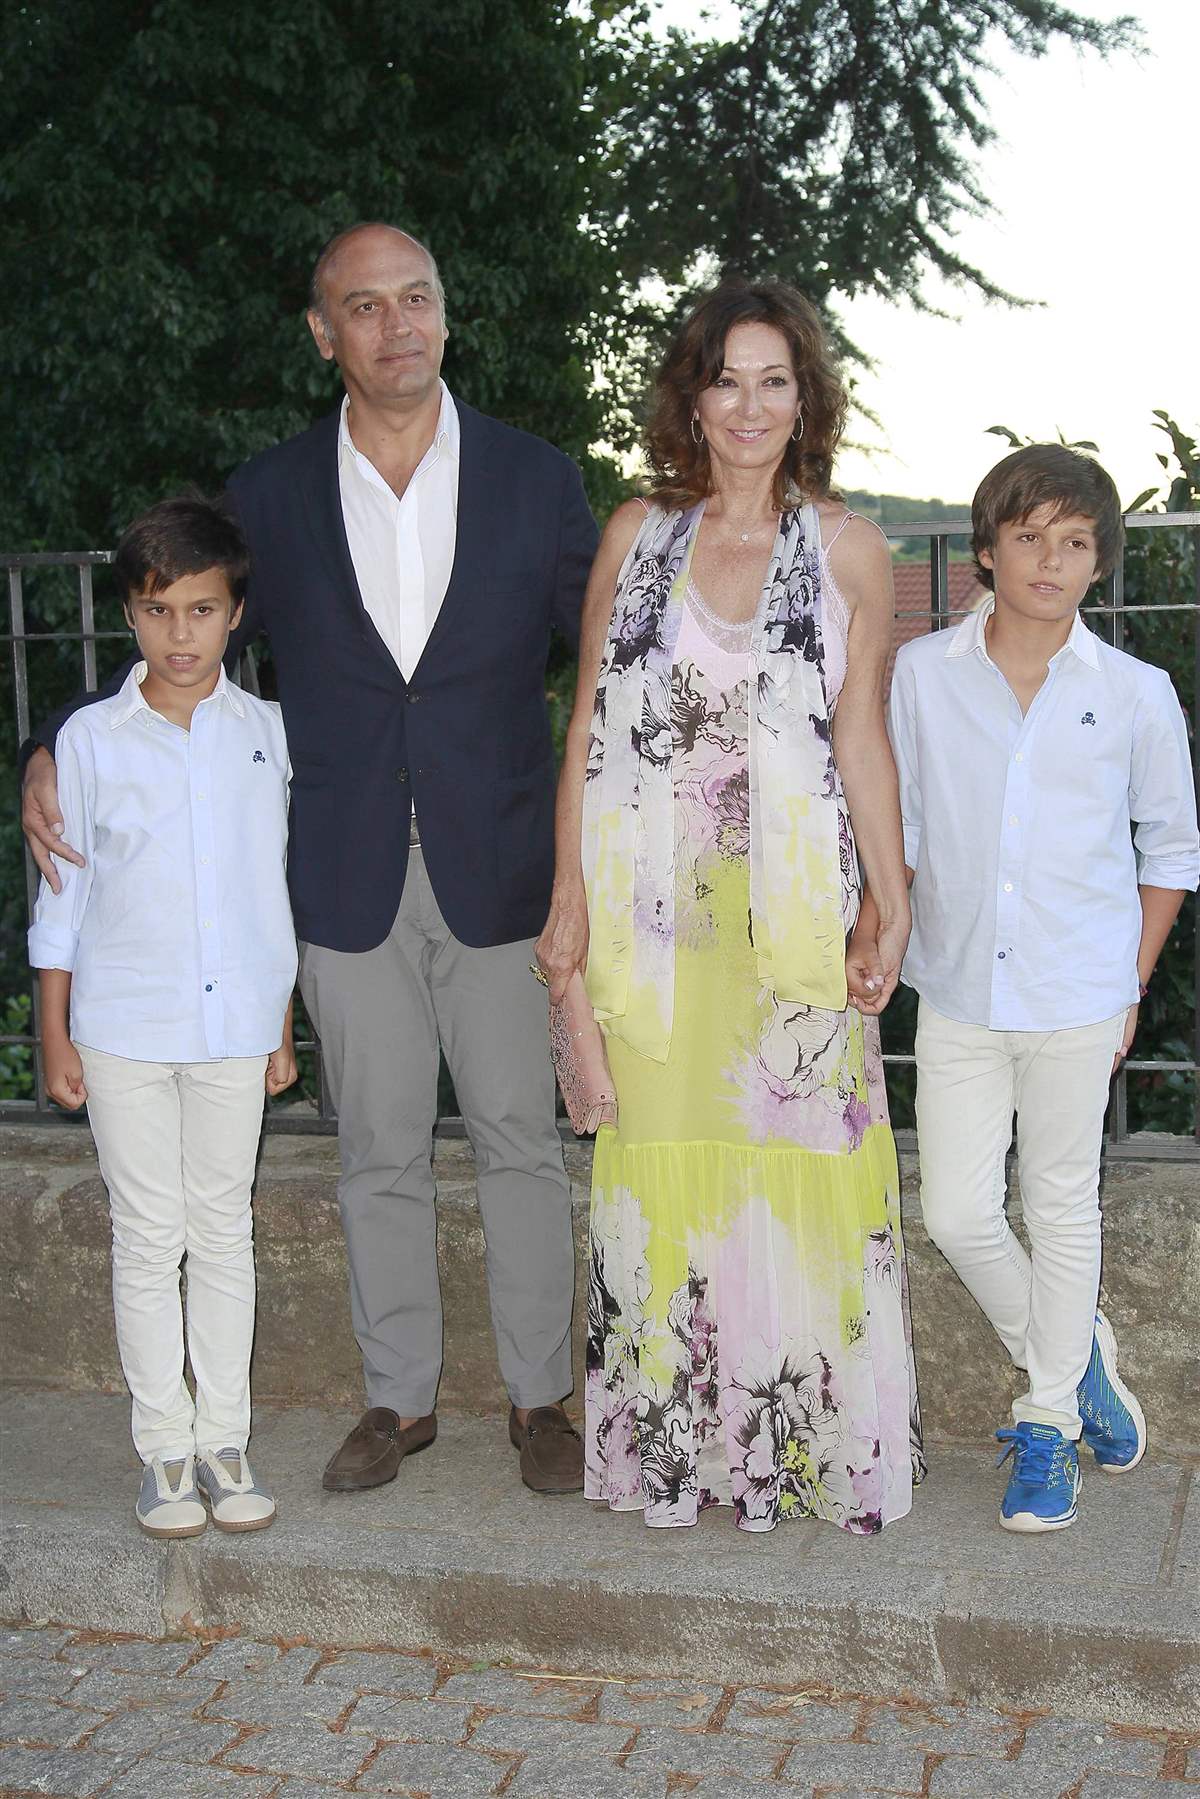 Ana Rosa Quintana and Juan Muñoz, in a 2016 photo with their twin sons, who have just turned 18